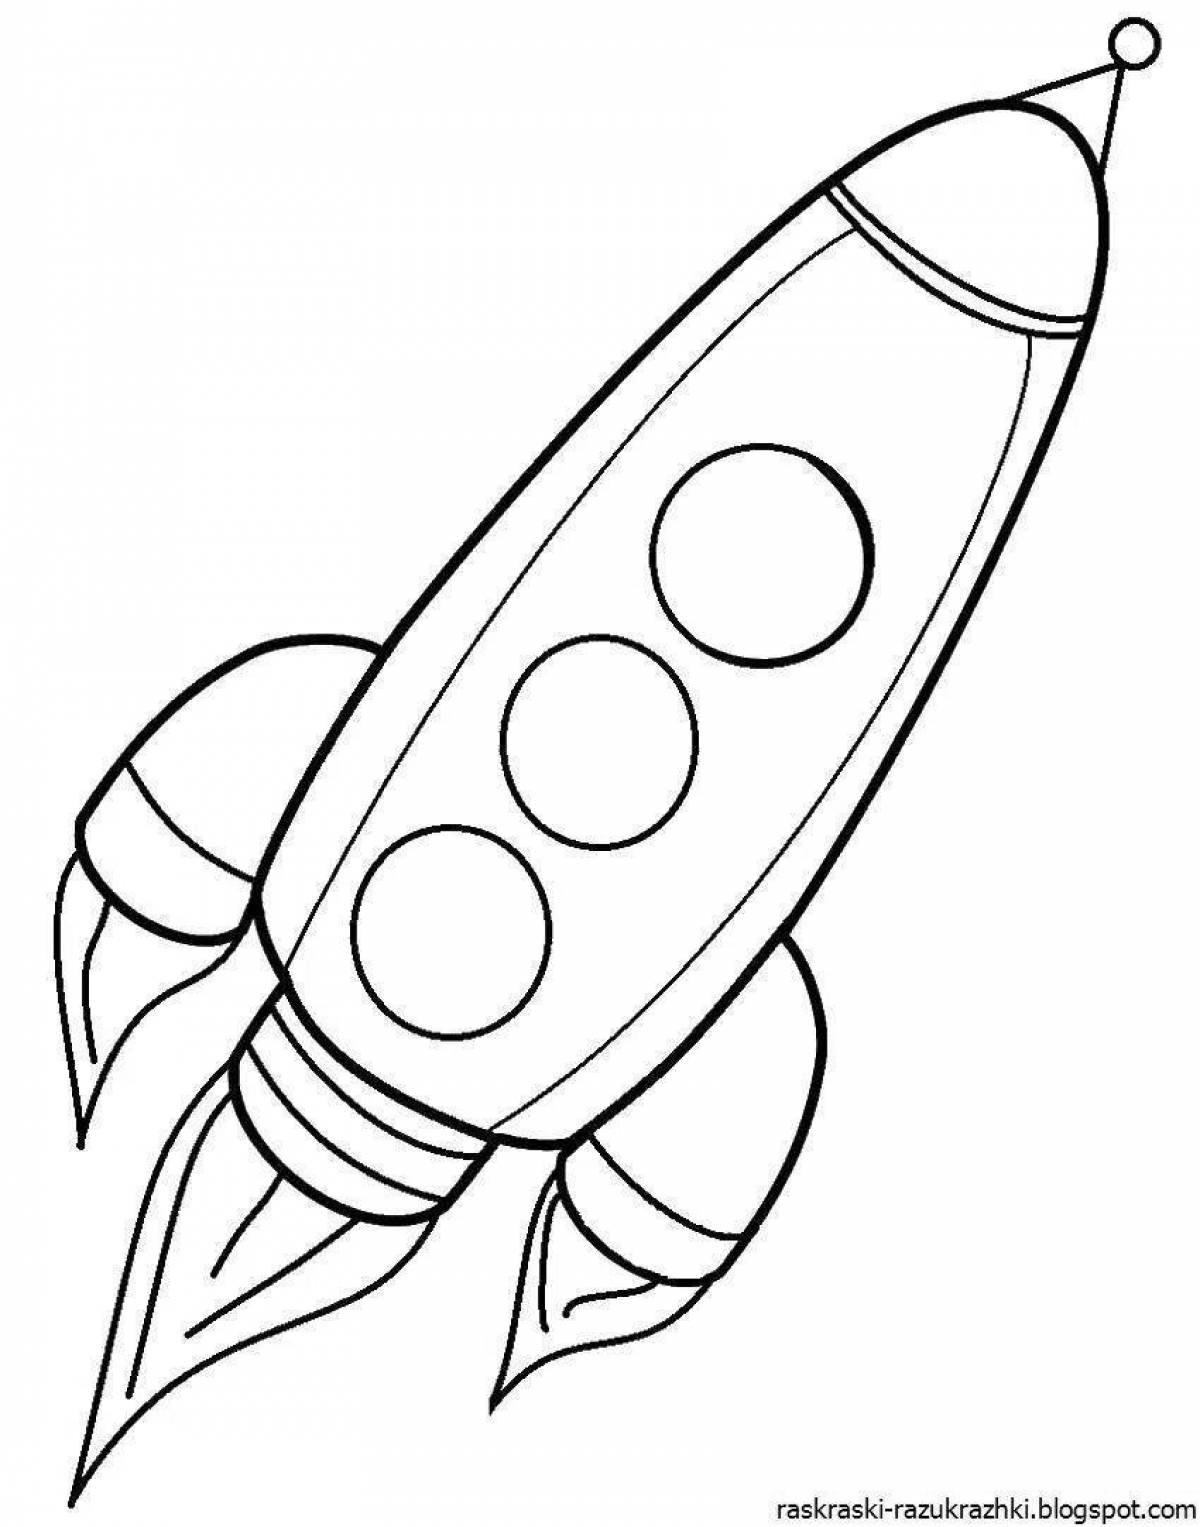 Great rocket coloring book for boys